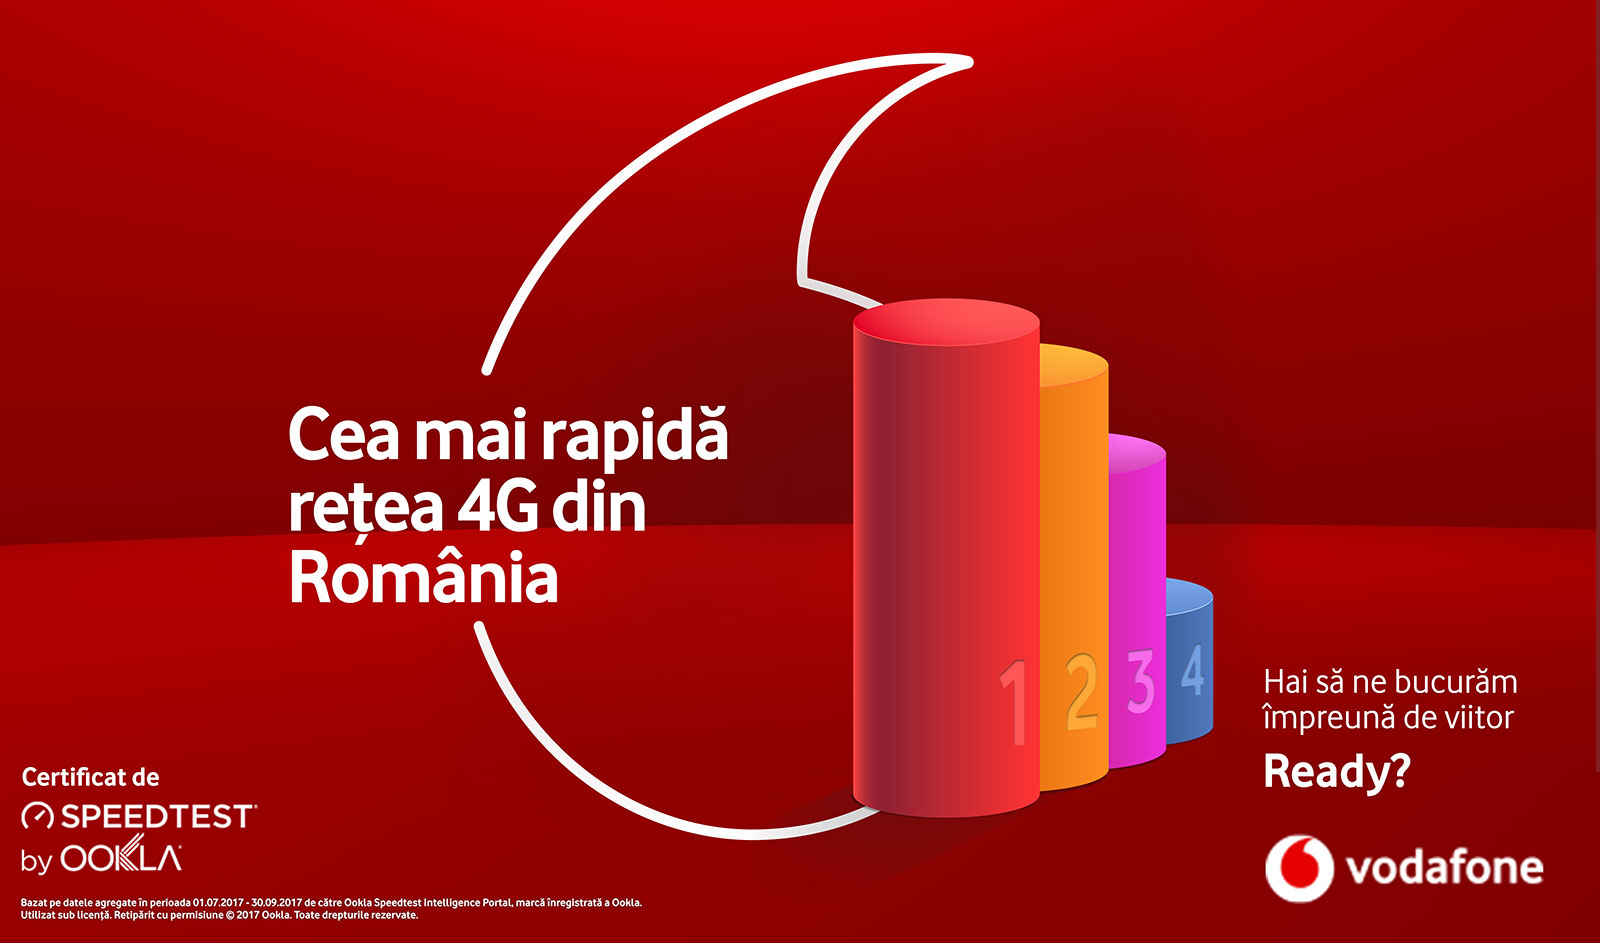 Vodafone Romania has the fastest mobile network, according to Ookla’s Speedtest data from Q3 2017